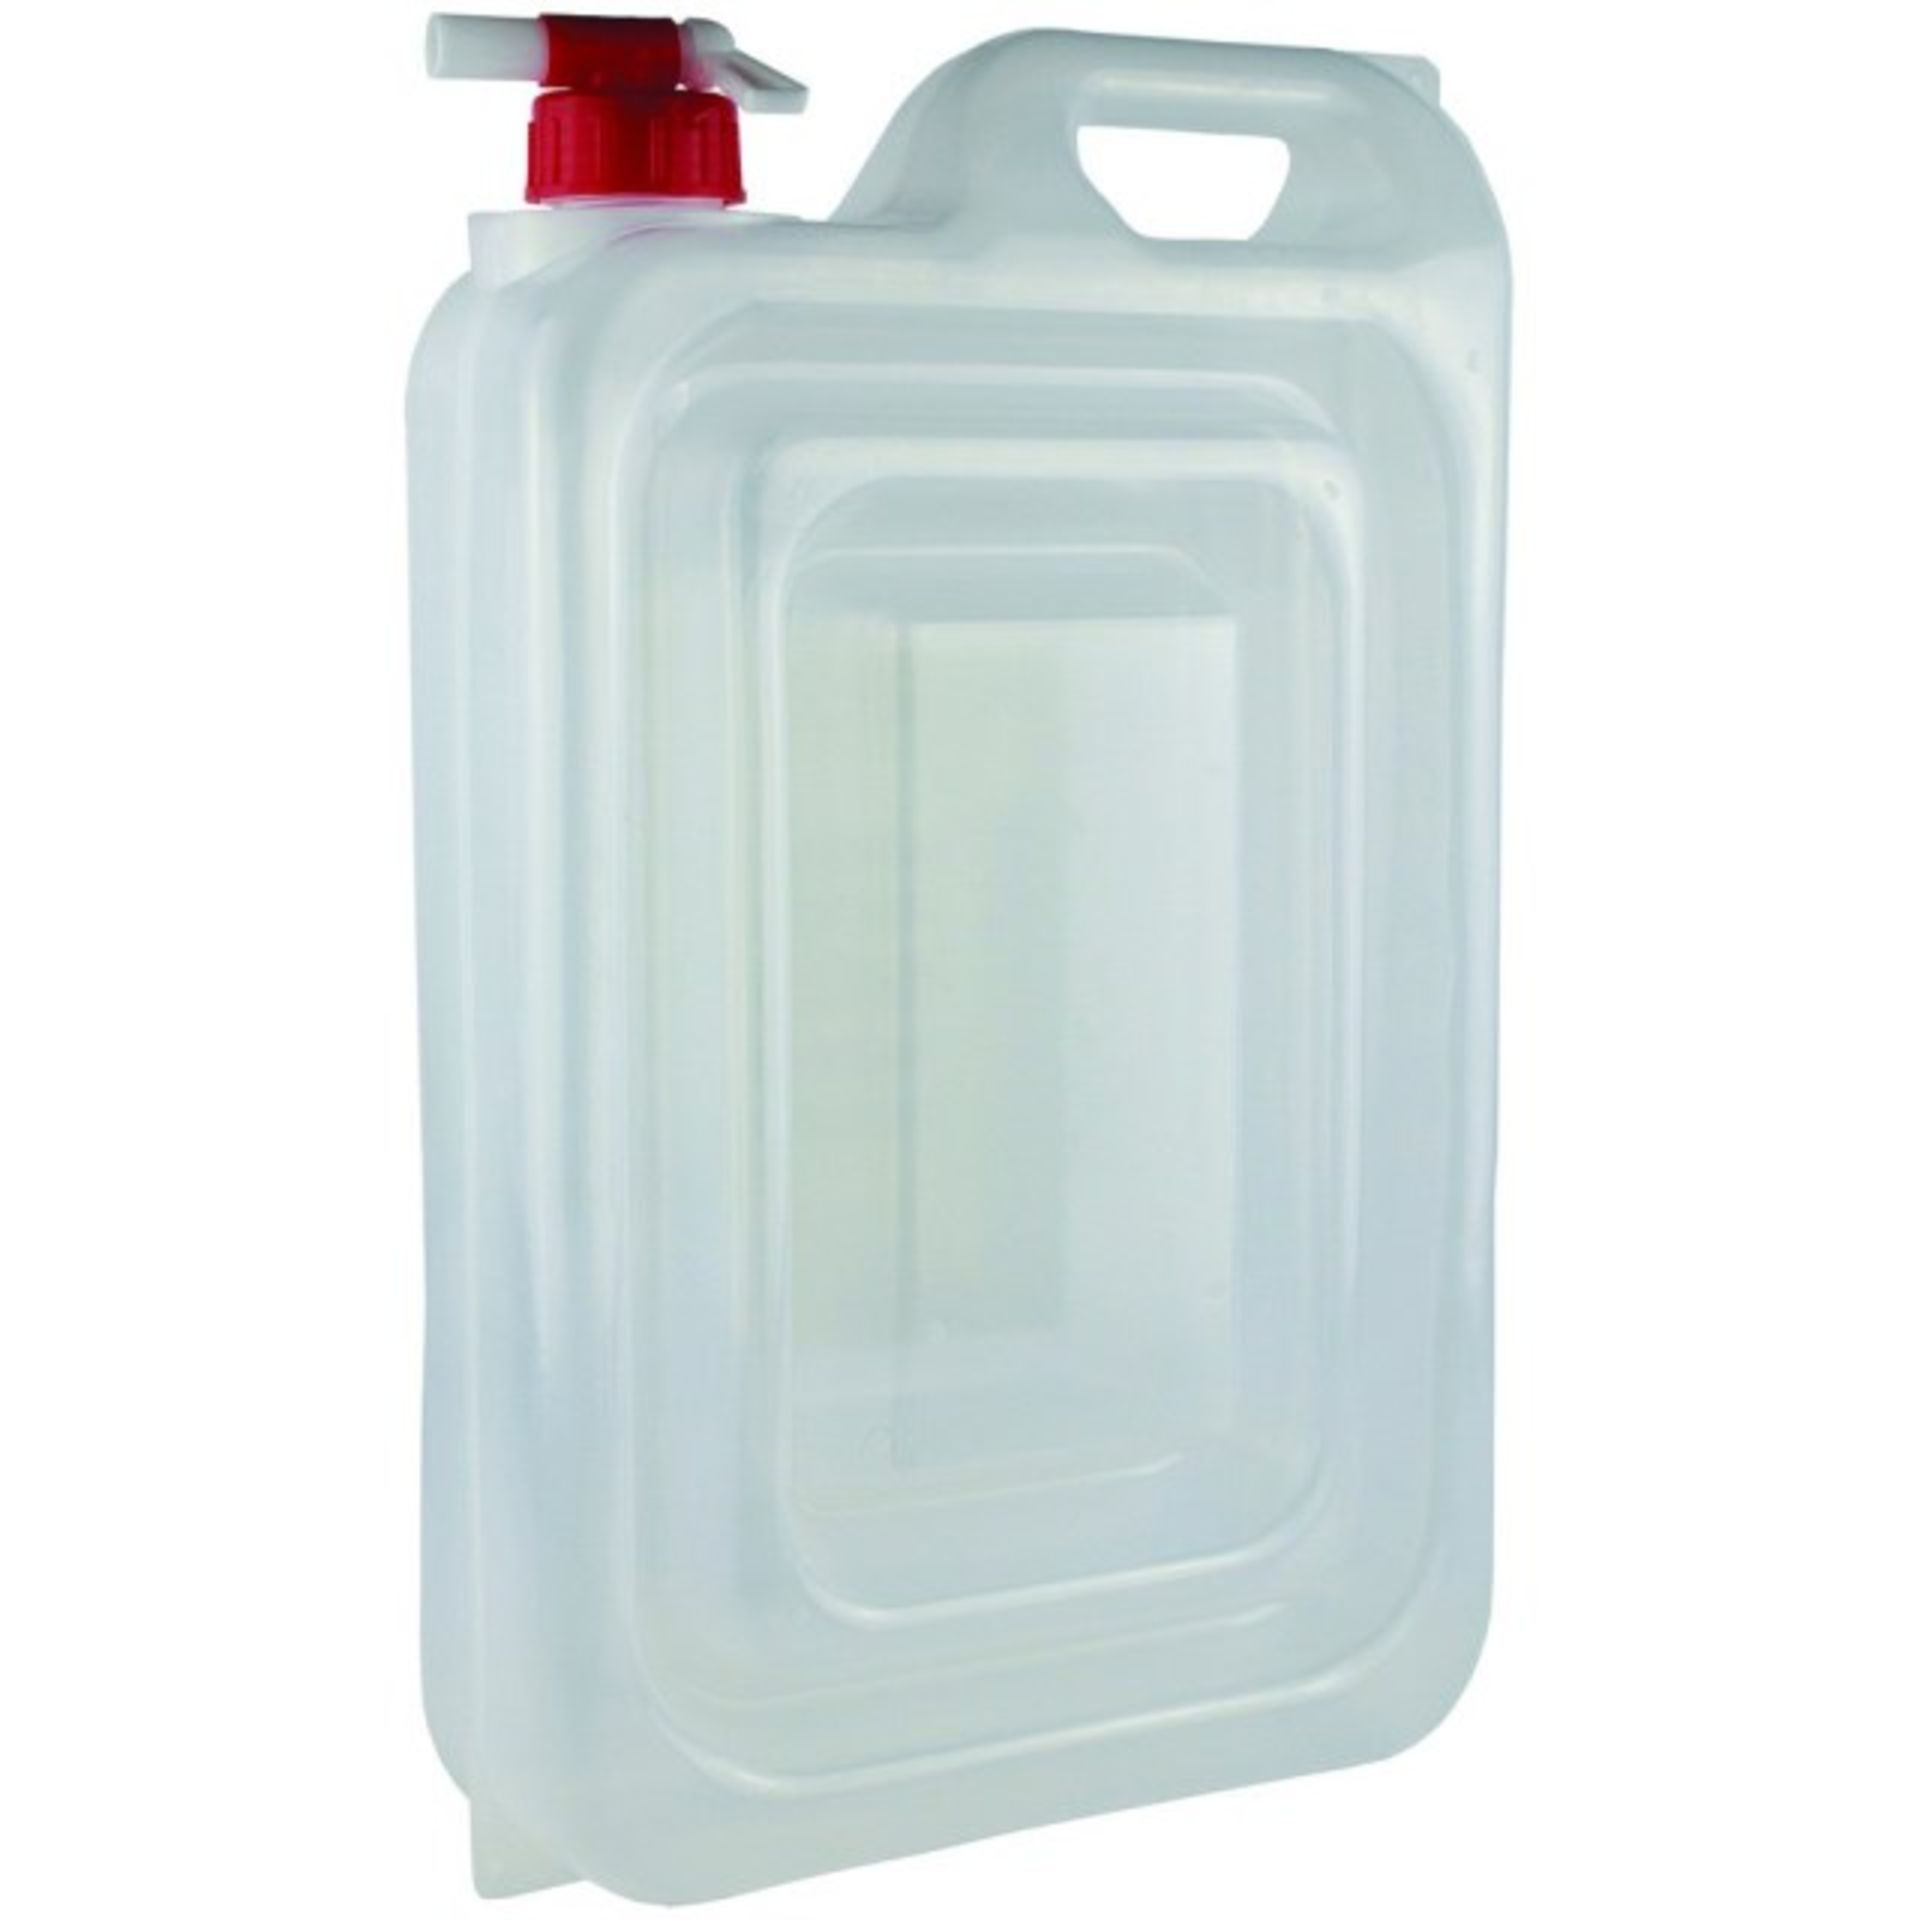 V Brand New 15 Litre Expandable Water Carrier X 2 YOUR BID PRICE TO BE MULTIPLIED BY TWO